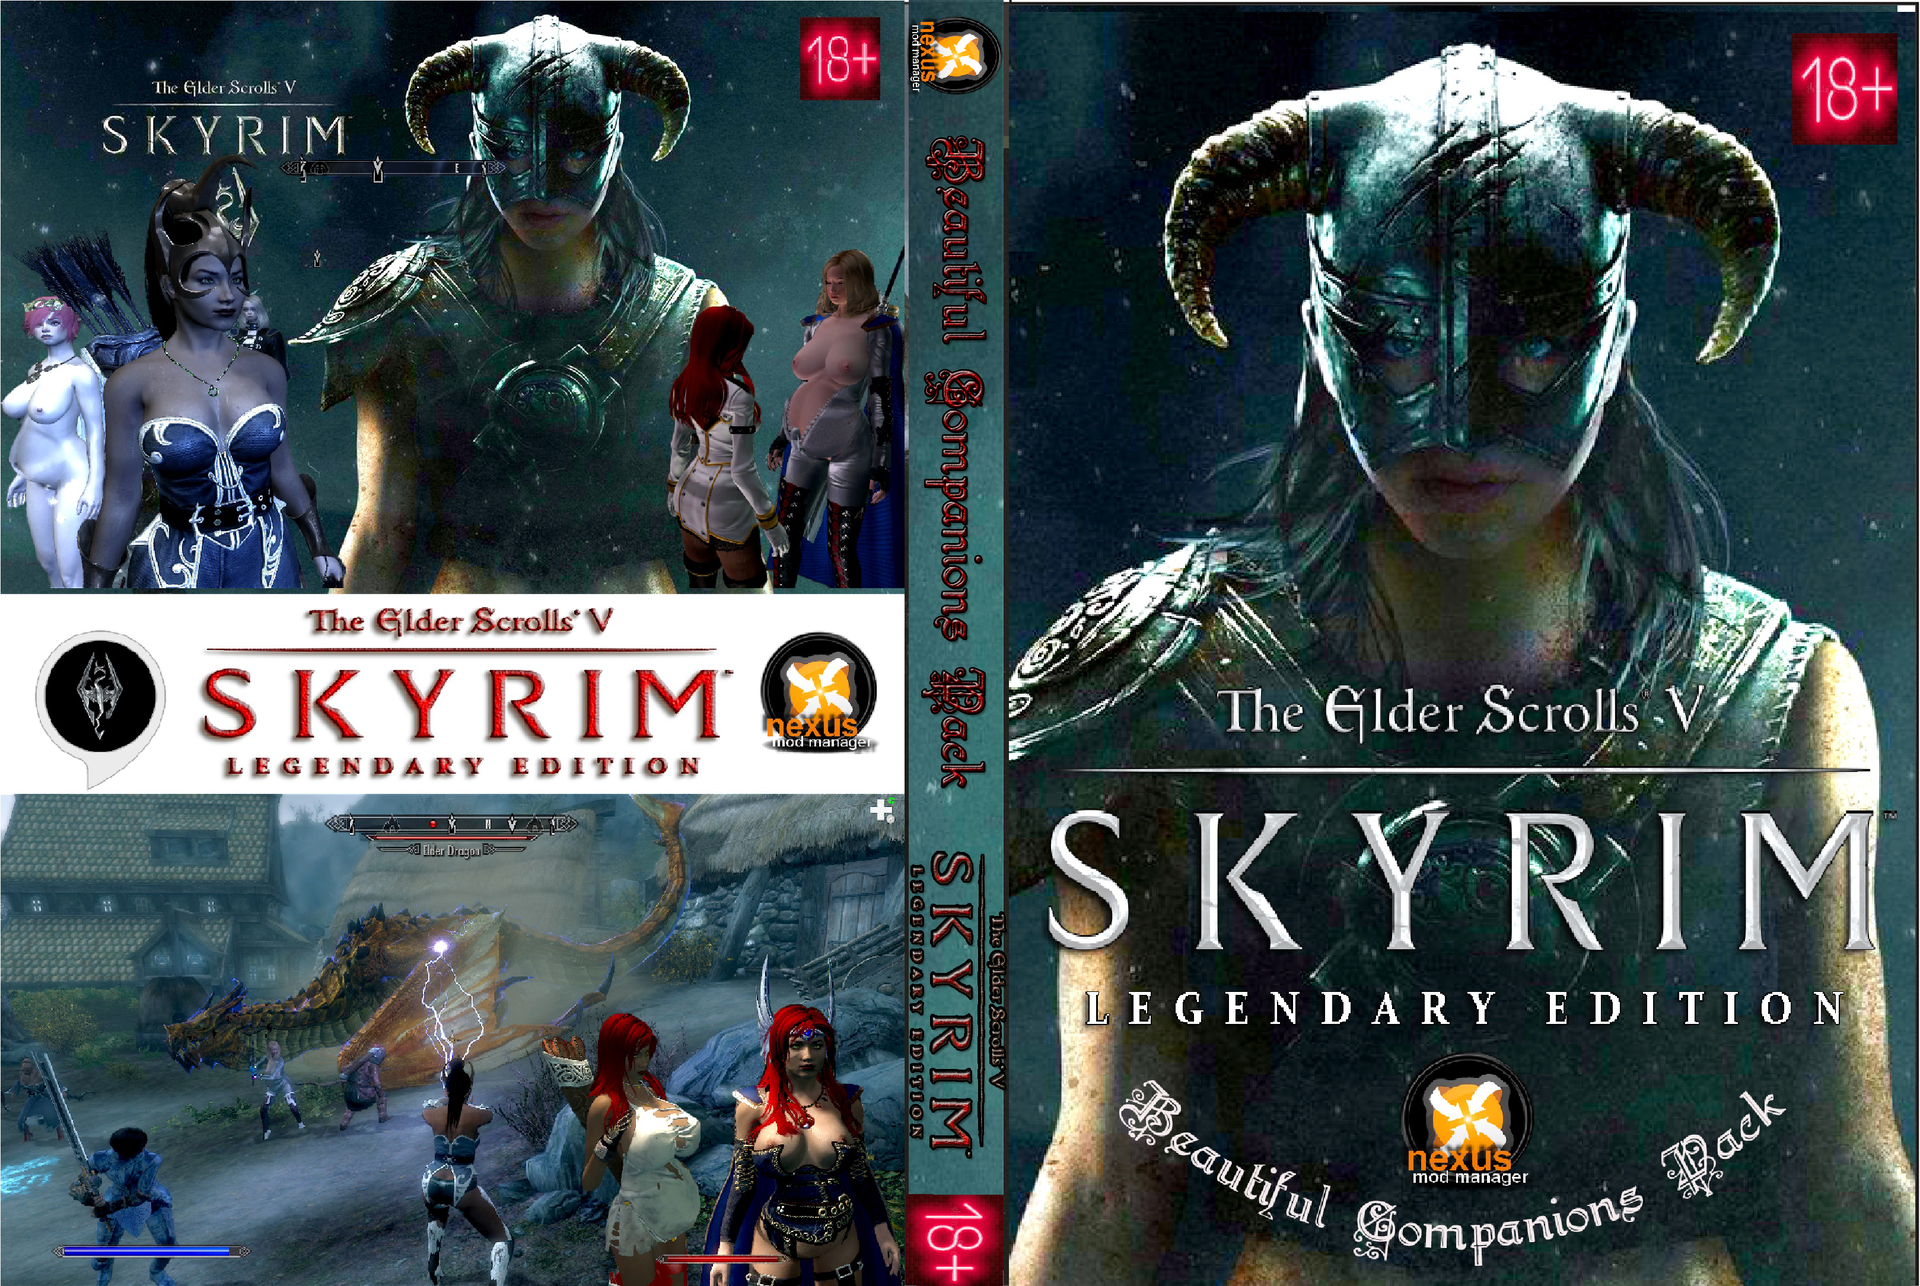 Skyrim Beautiful Companions Pack Cover A.png